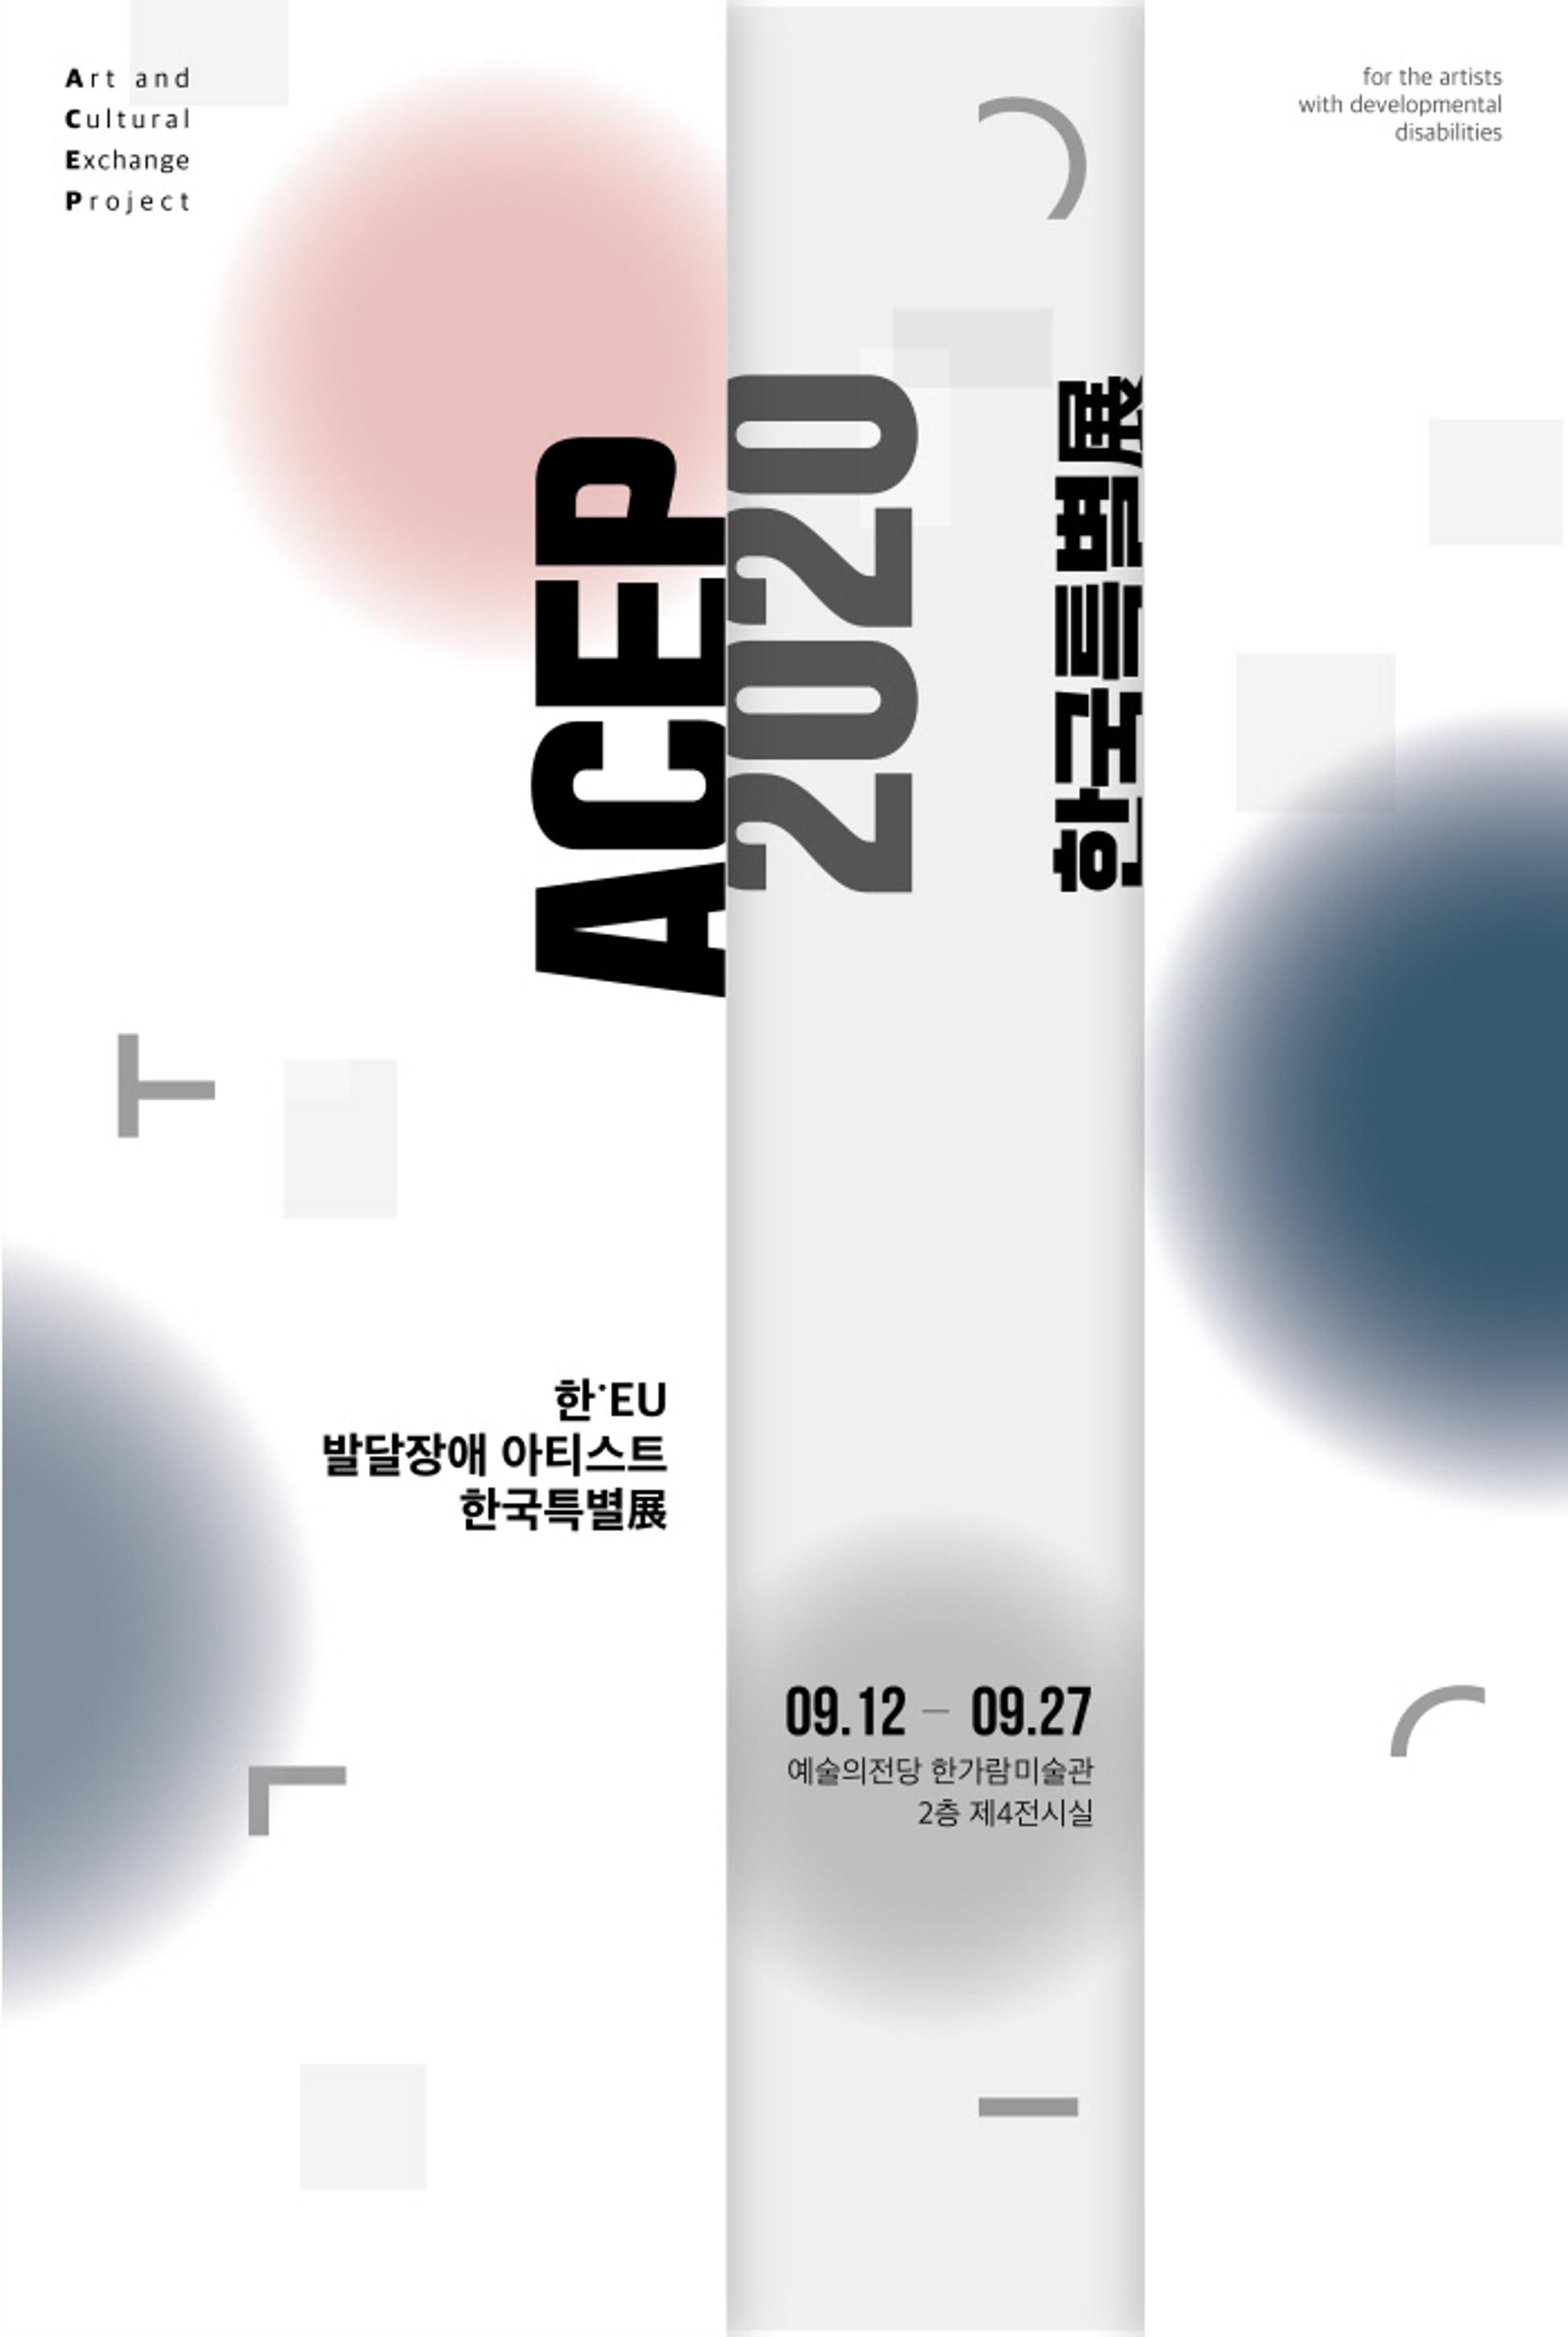 <p>Art and <br>Cultural <br>Exchange <br>Project</p>
<p>for the artists <br>with developmental <br>disabilities</p>
<p>ACEP 2020 한국특별展</p>
<p>한·EU 발달장애 아티스트 한국특별展</p>
<p>09.12 - 09.27 <br>예술의전당 한가람미술관 <br>2층 제4전시실</p>